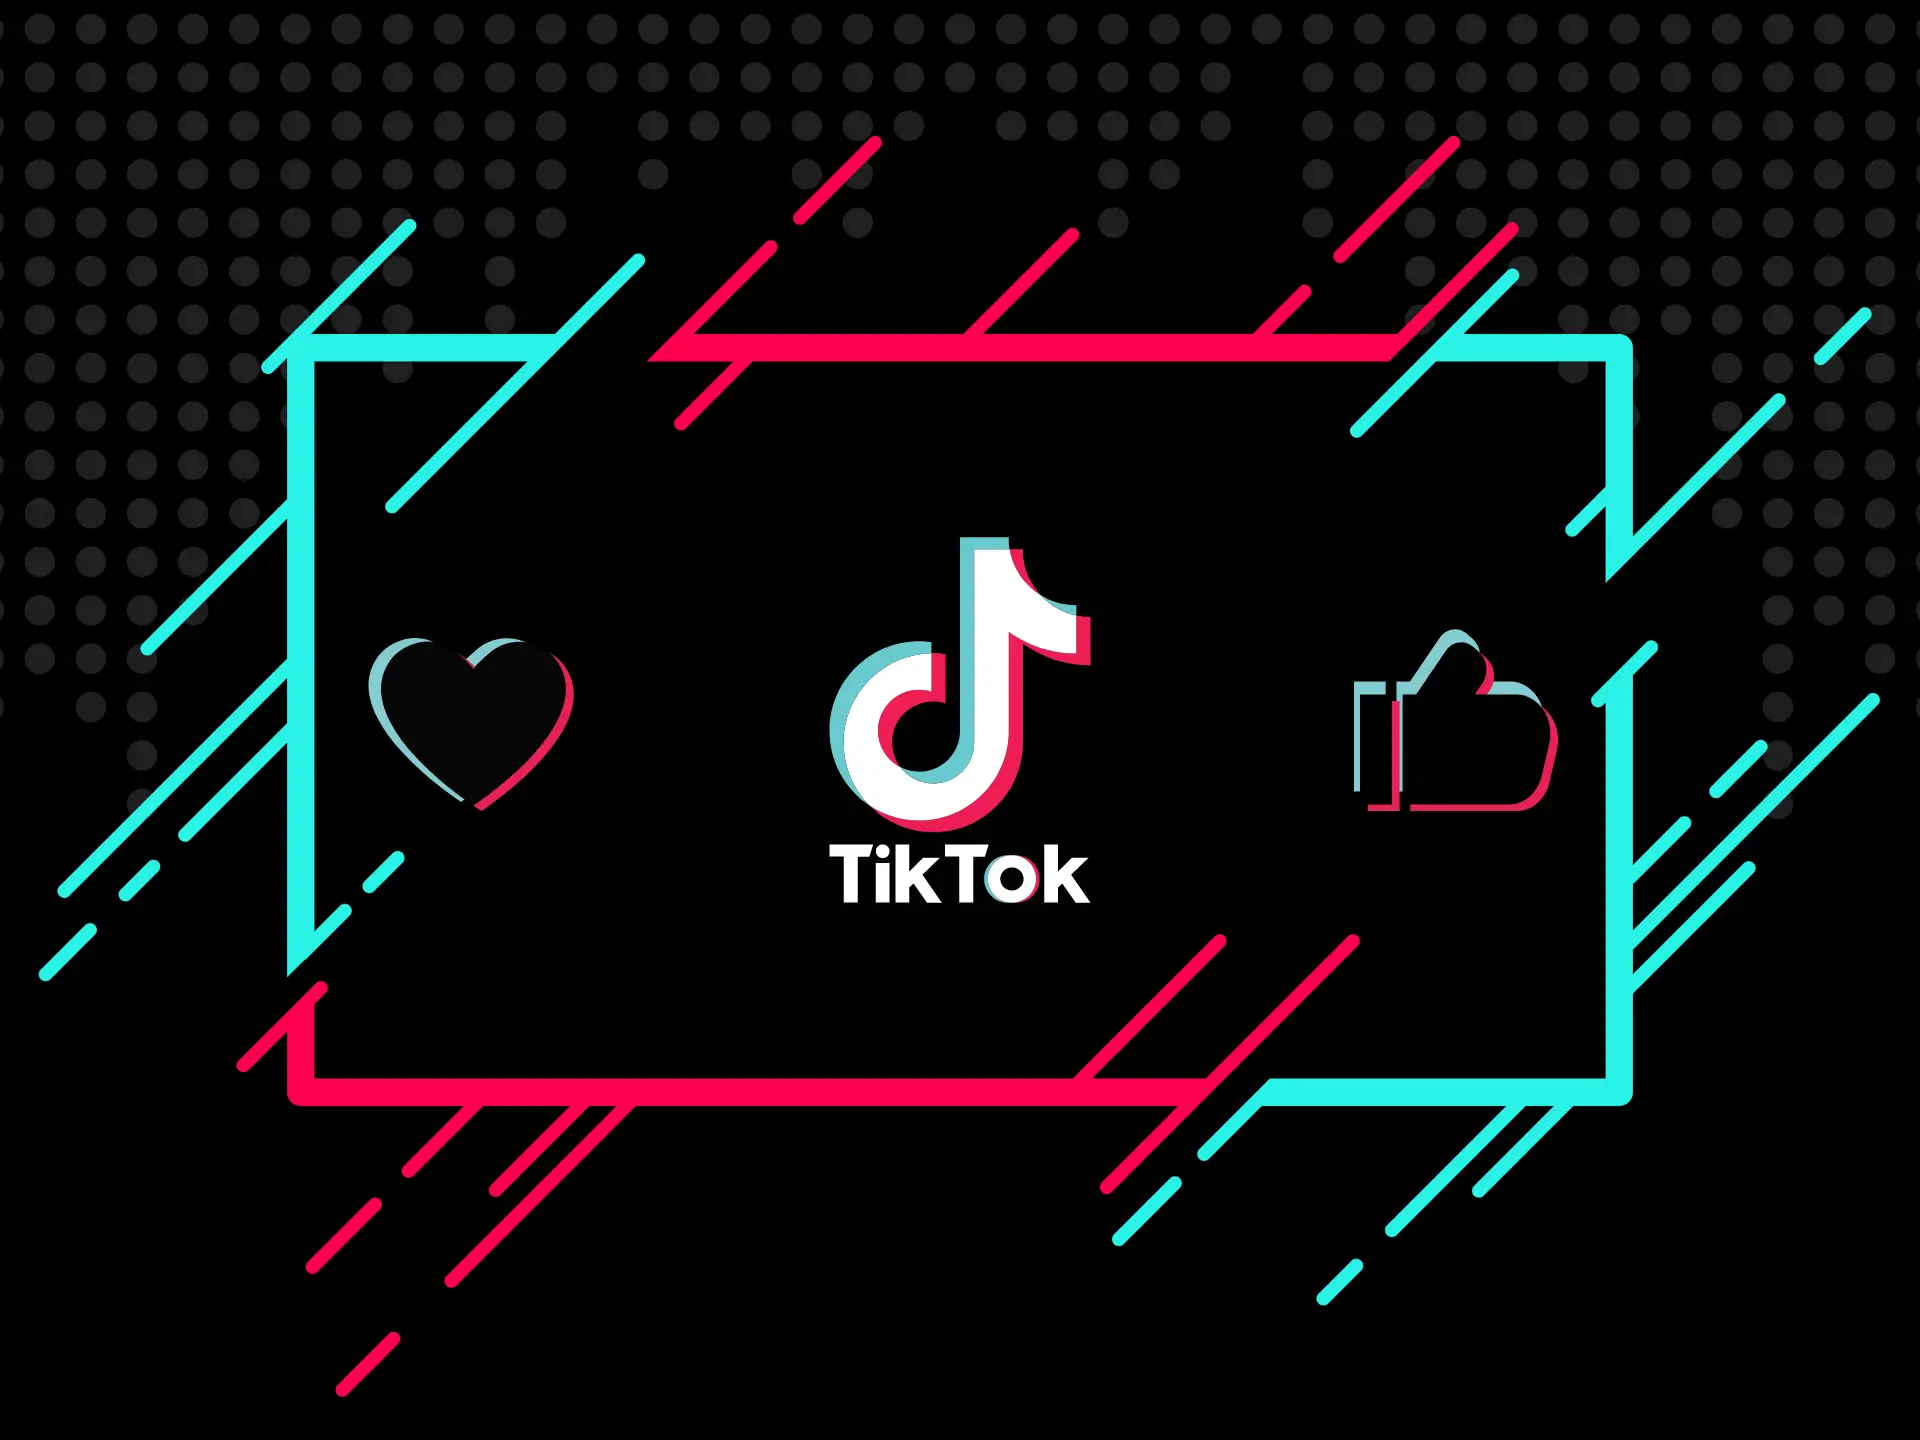 How Can You Use TikTok to Promote Your Business?